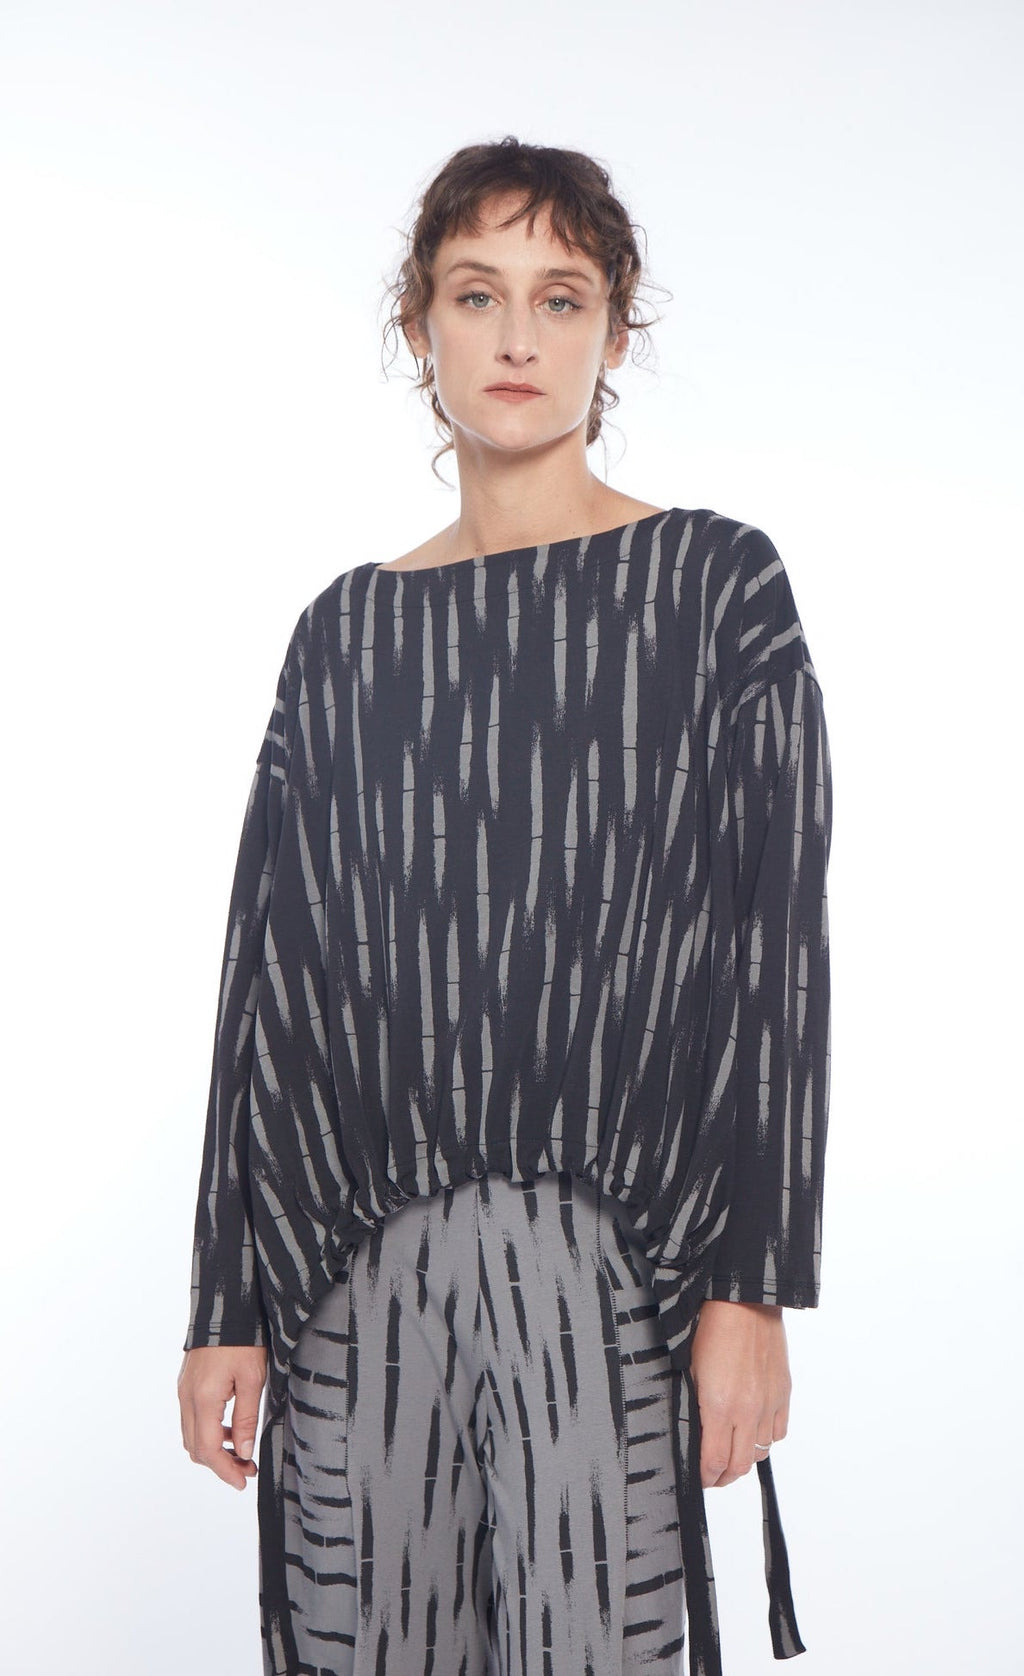 Front top half view of a woman wearing the mxmatthildur liev top. This top is black with a grey bamboo print on it. The top has long sleeves, a boat neck, and a tie/elastic hem.